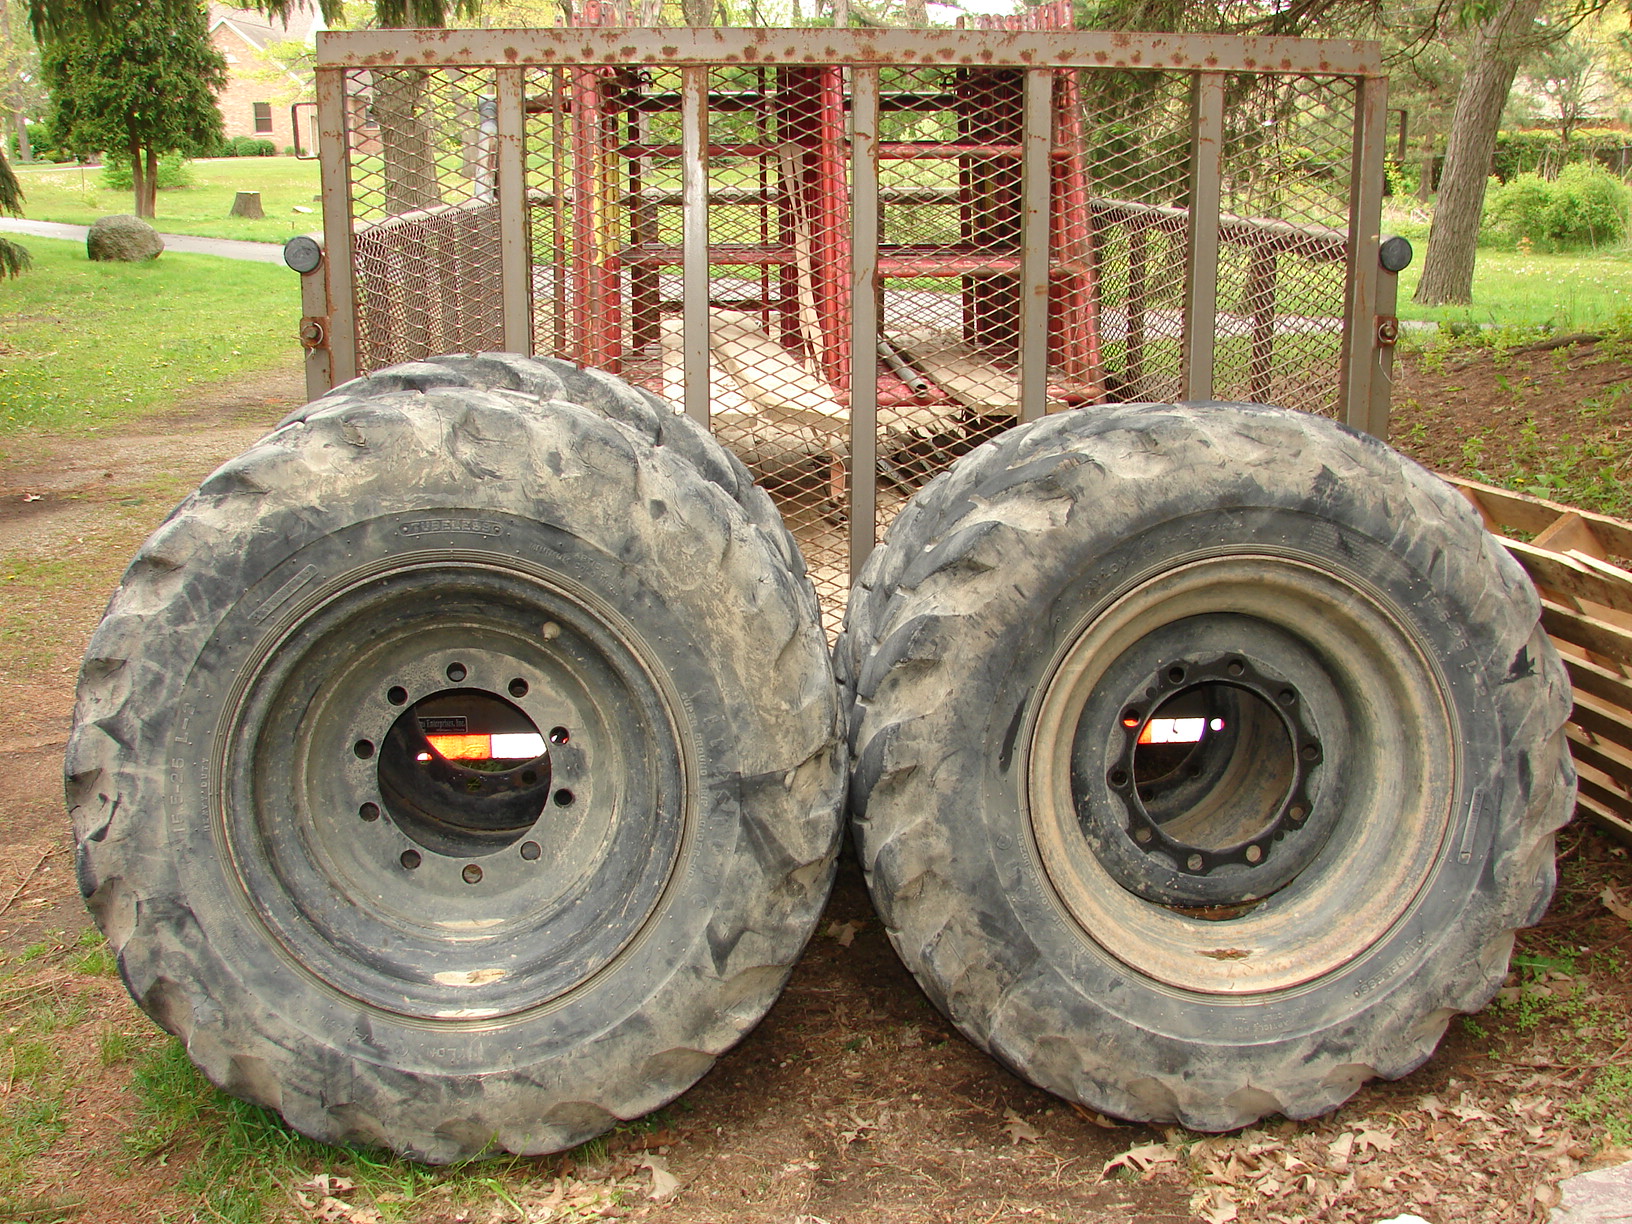 there are two big tires by the gate